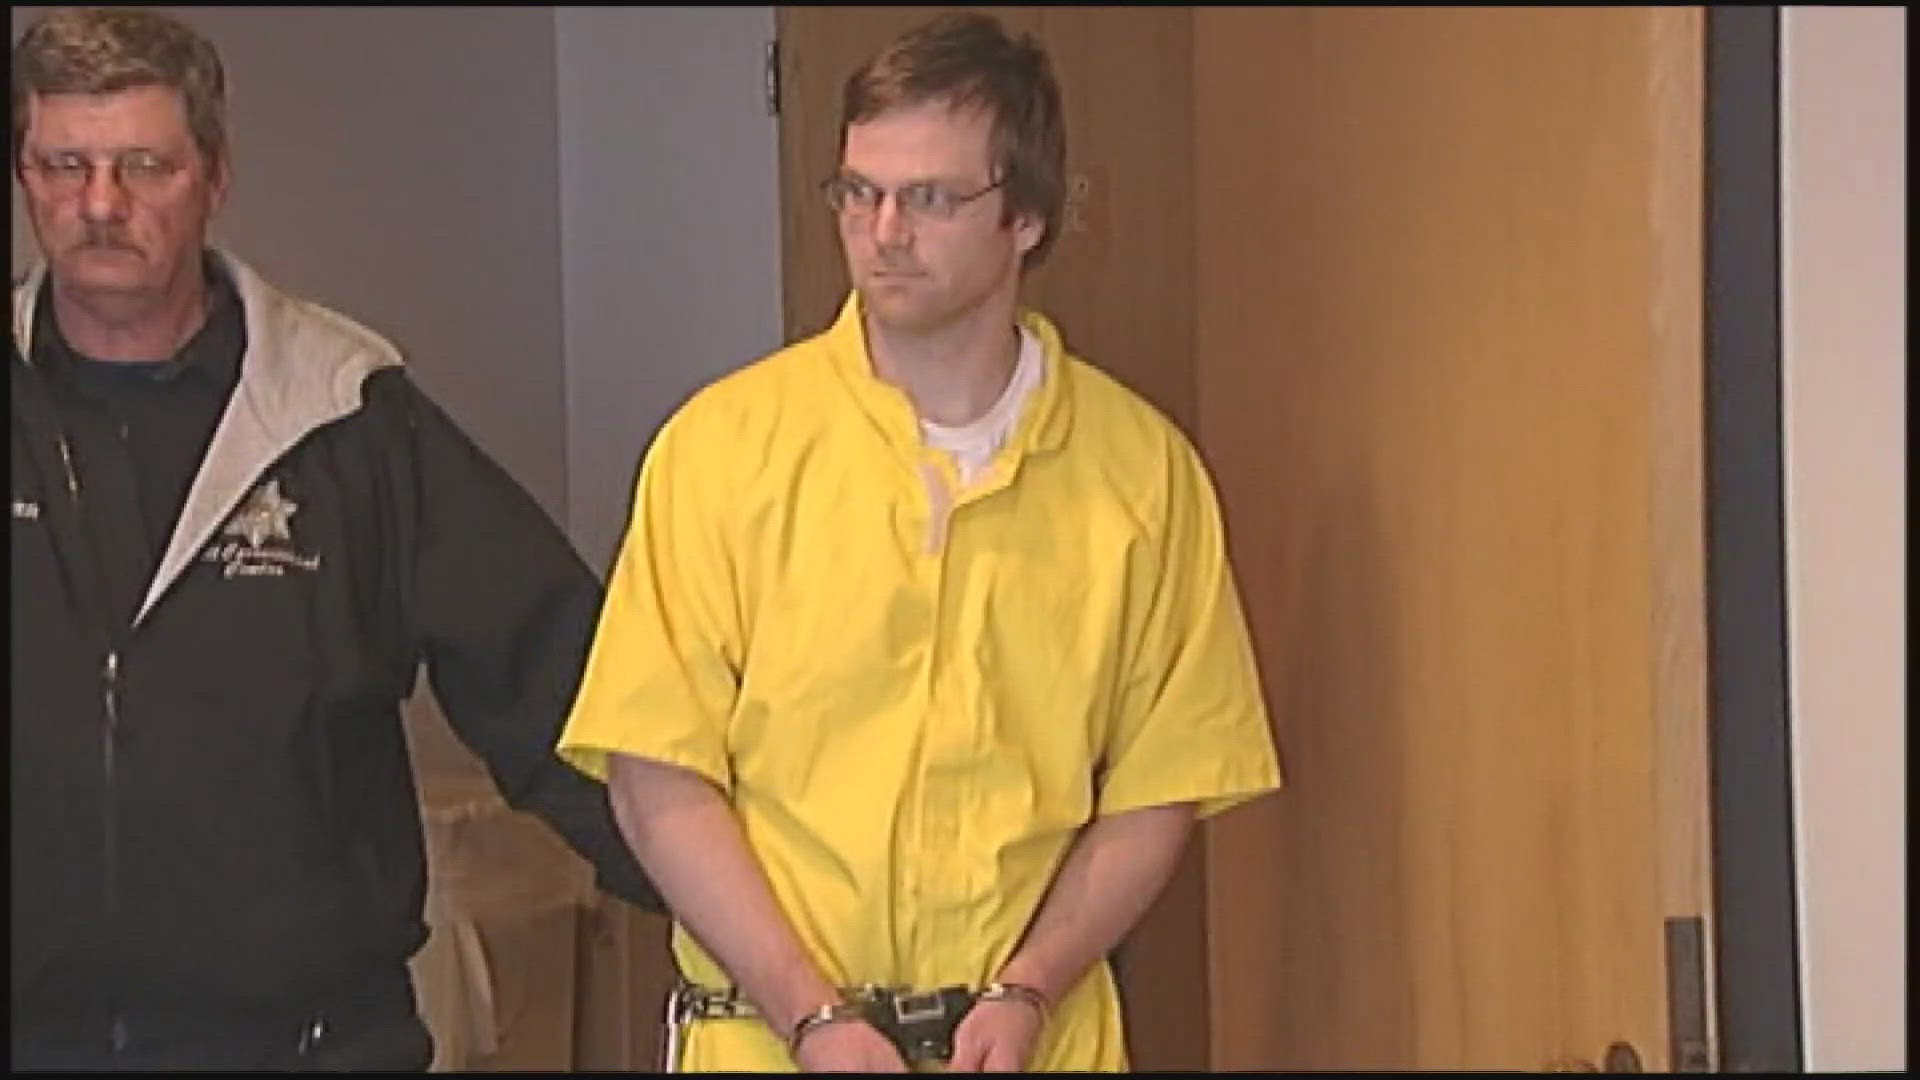 Sam Shelton pleaded guilty in 2007 to trying to kill 17-year-old Ashley Reeves and leaving her for dead in a park.